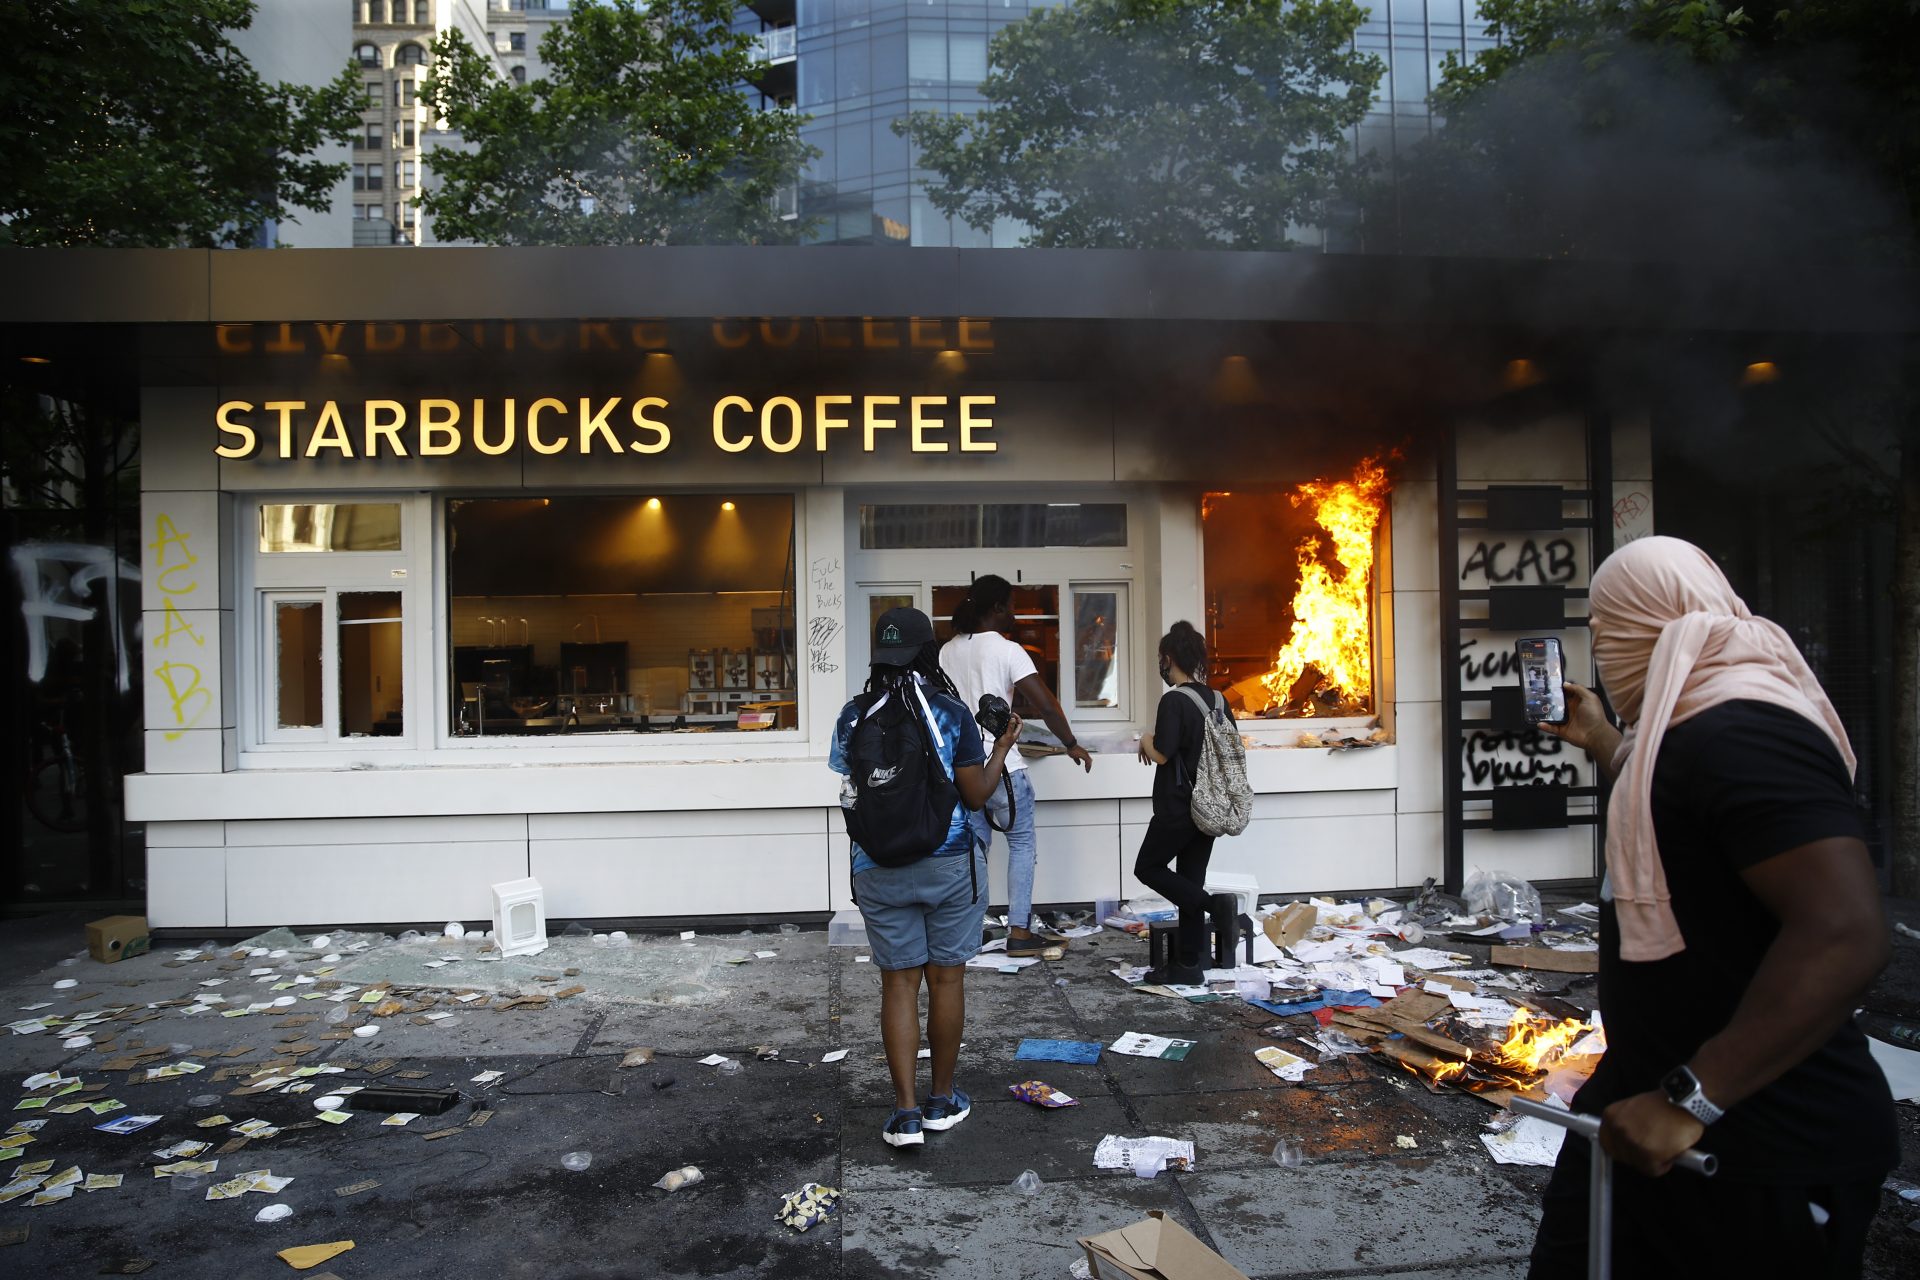 A Starbucks store burns during a protest on Saturday, May 30, 2020, in Philadelphia, over the death of George Floyd, a black man who died after being taken into police custody in Minneapolis. Floyd died after an officer pressed his knee into his neck for several minutes even after he stopped moving and pleading for air on Memorial Day.